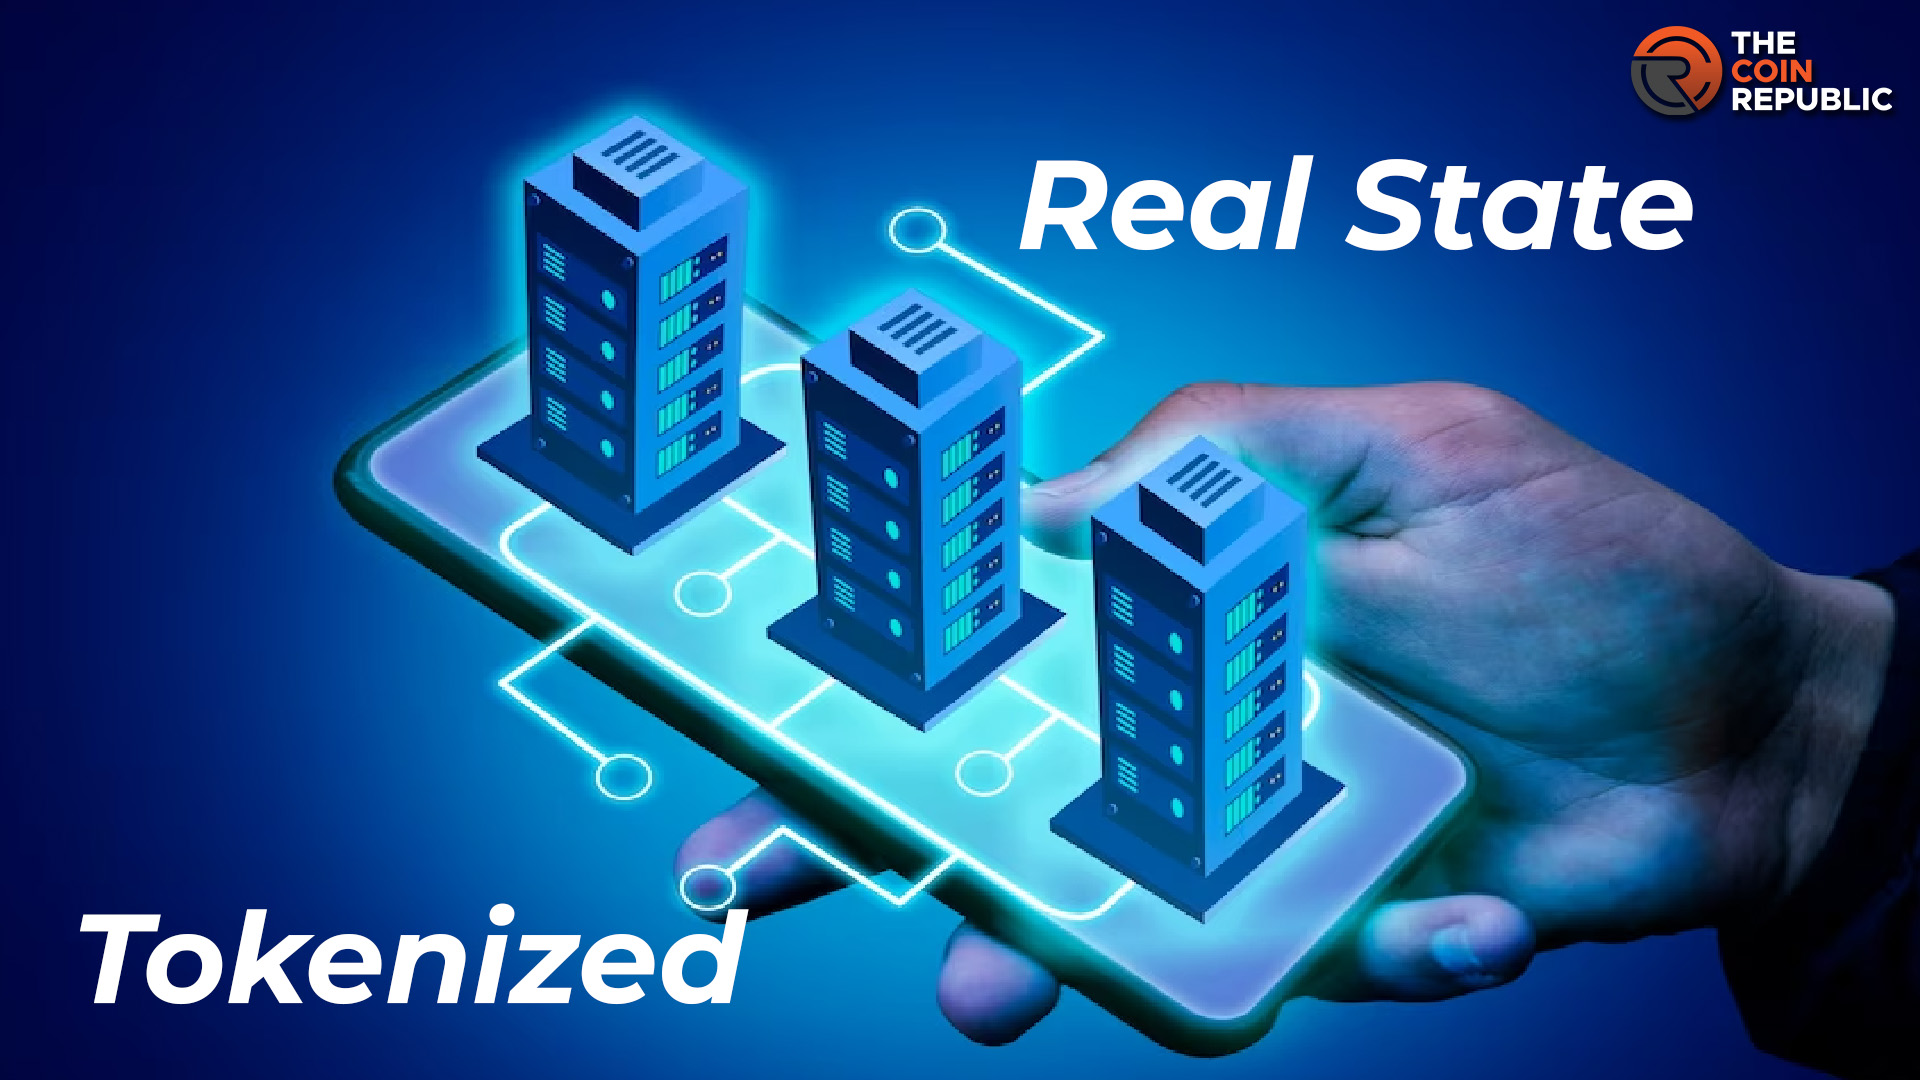 Real Estate Tokenization- What is it and What Are the Benefits